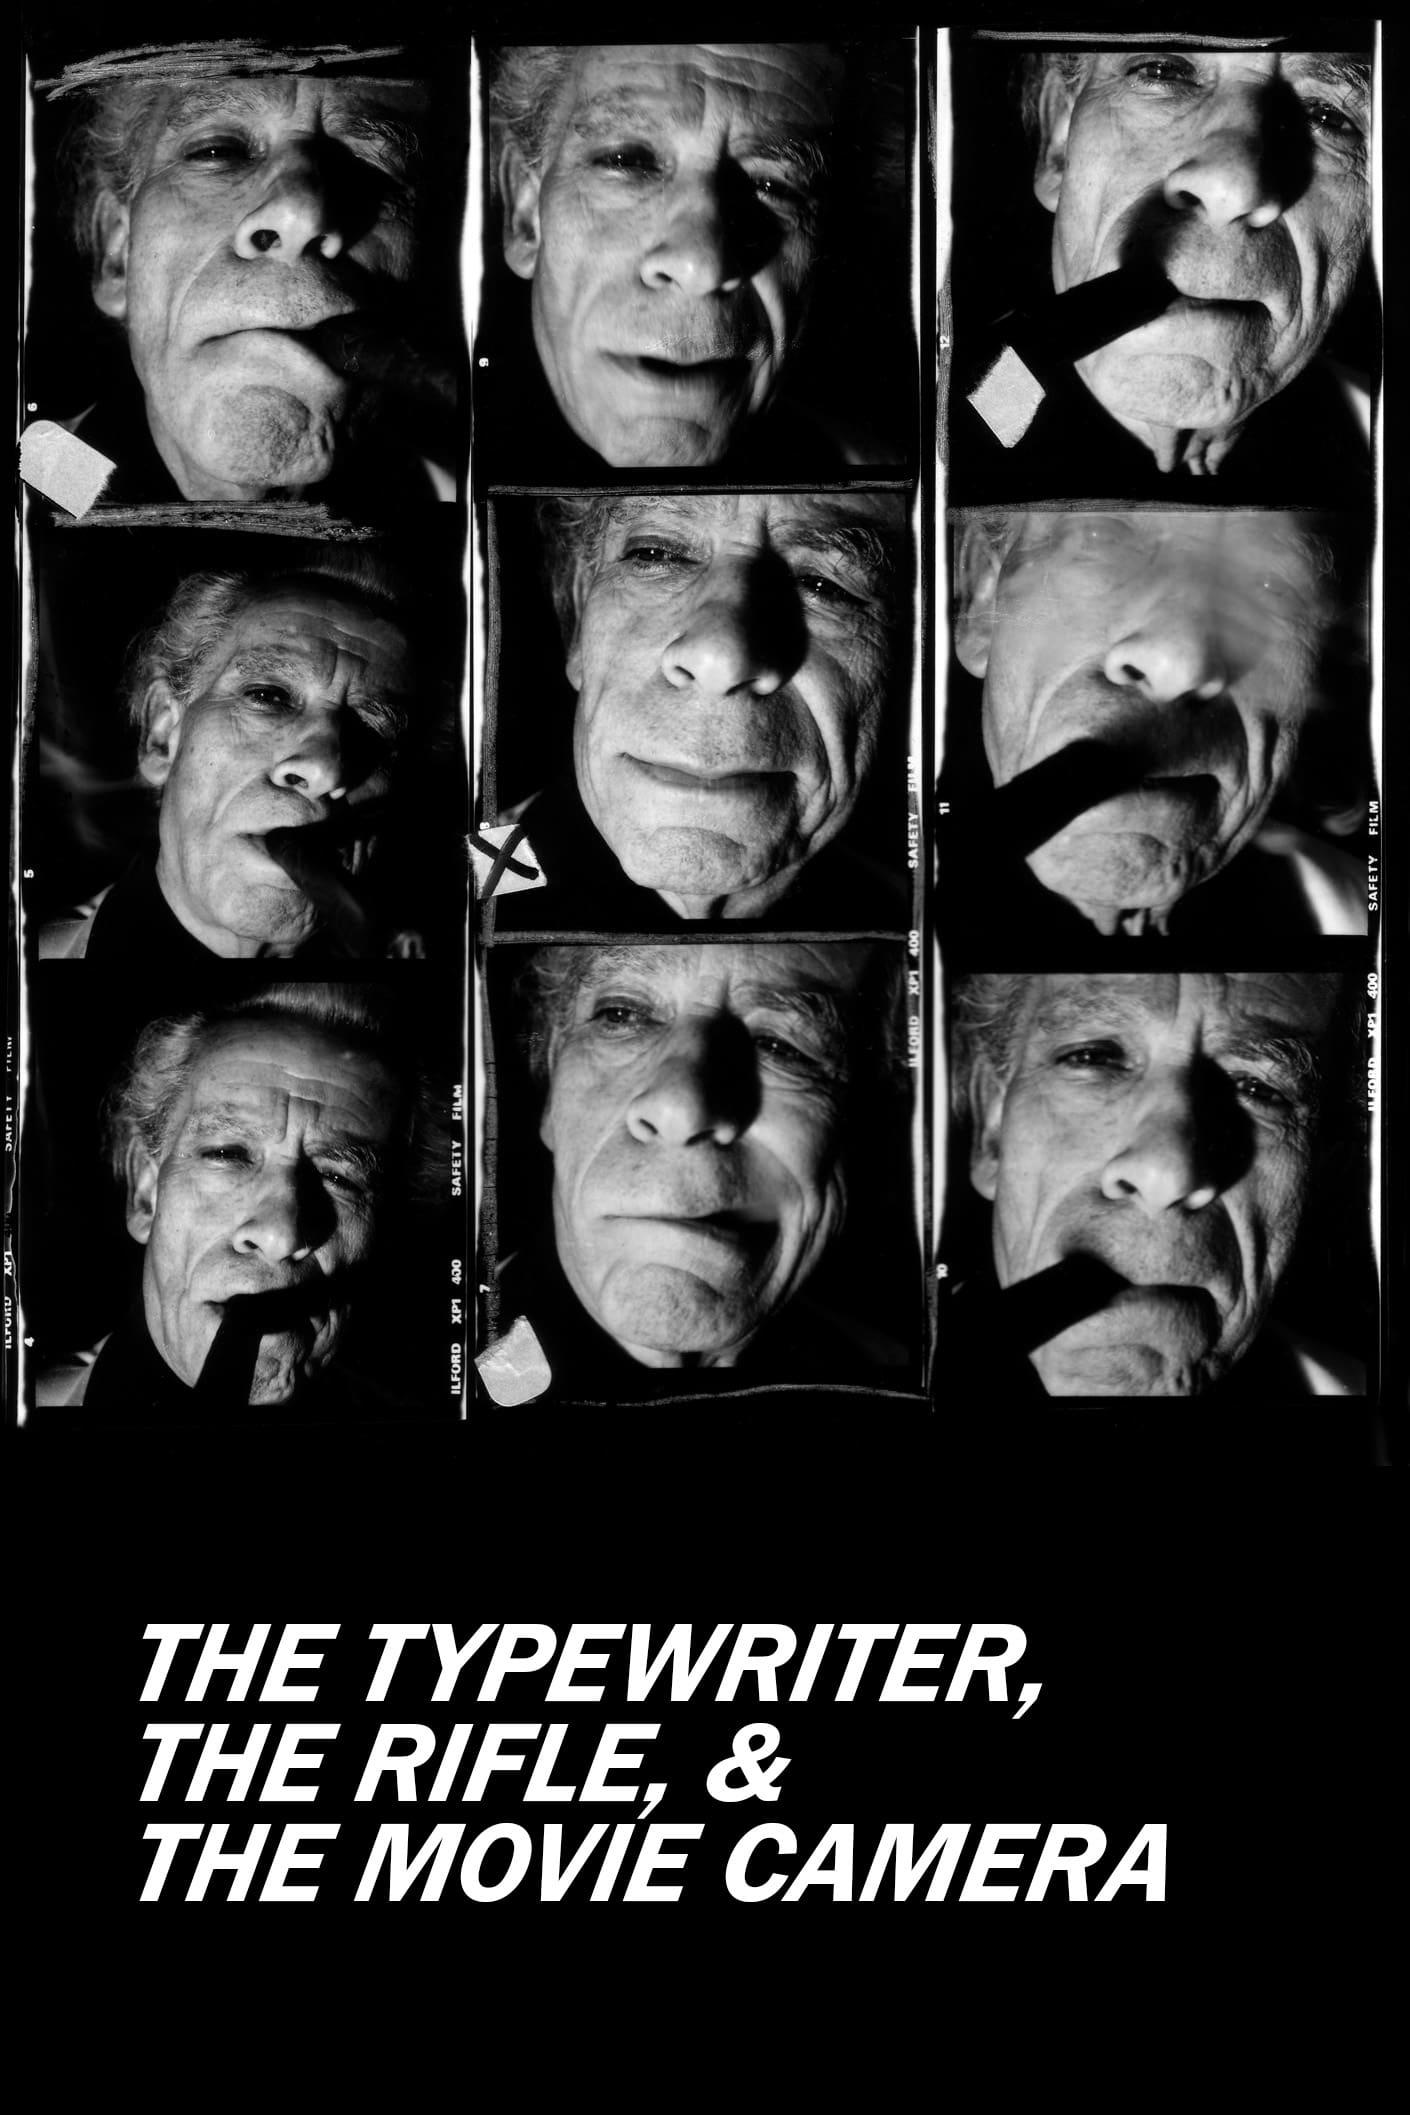 The Typewriter, the Rifle & the Movie Camera poster